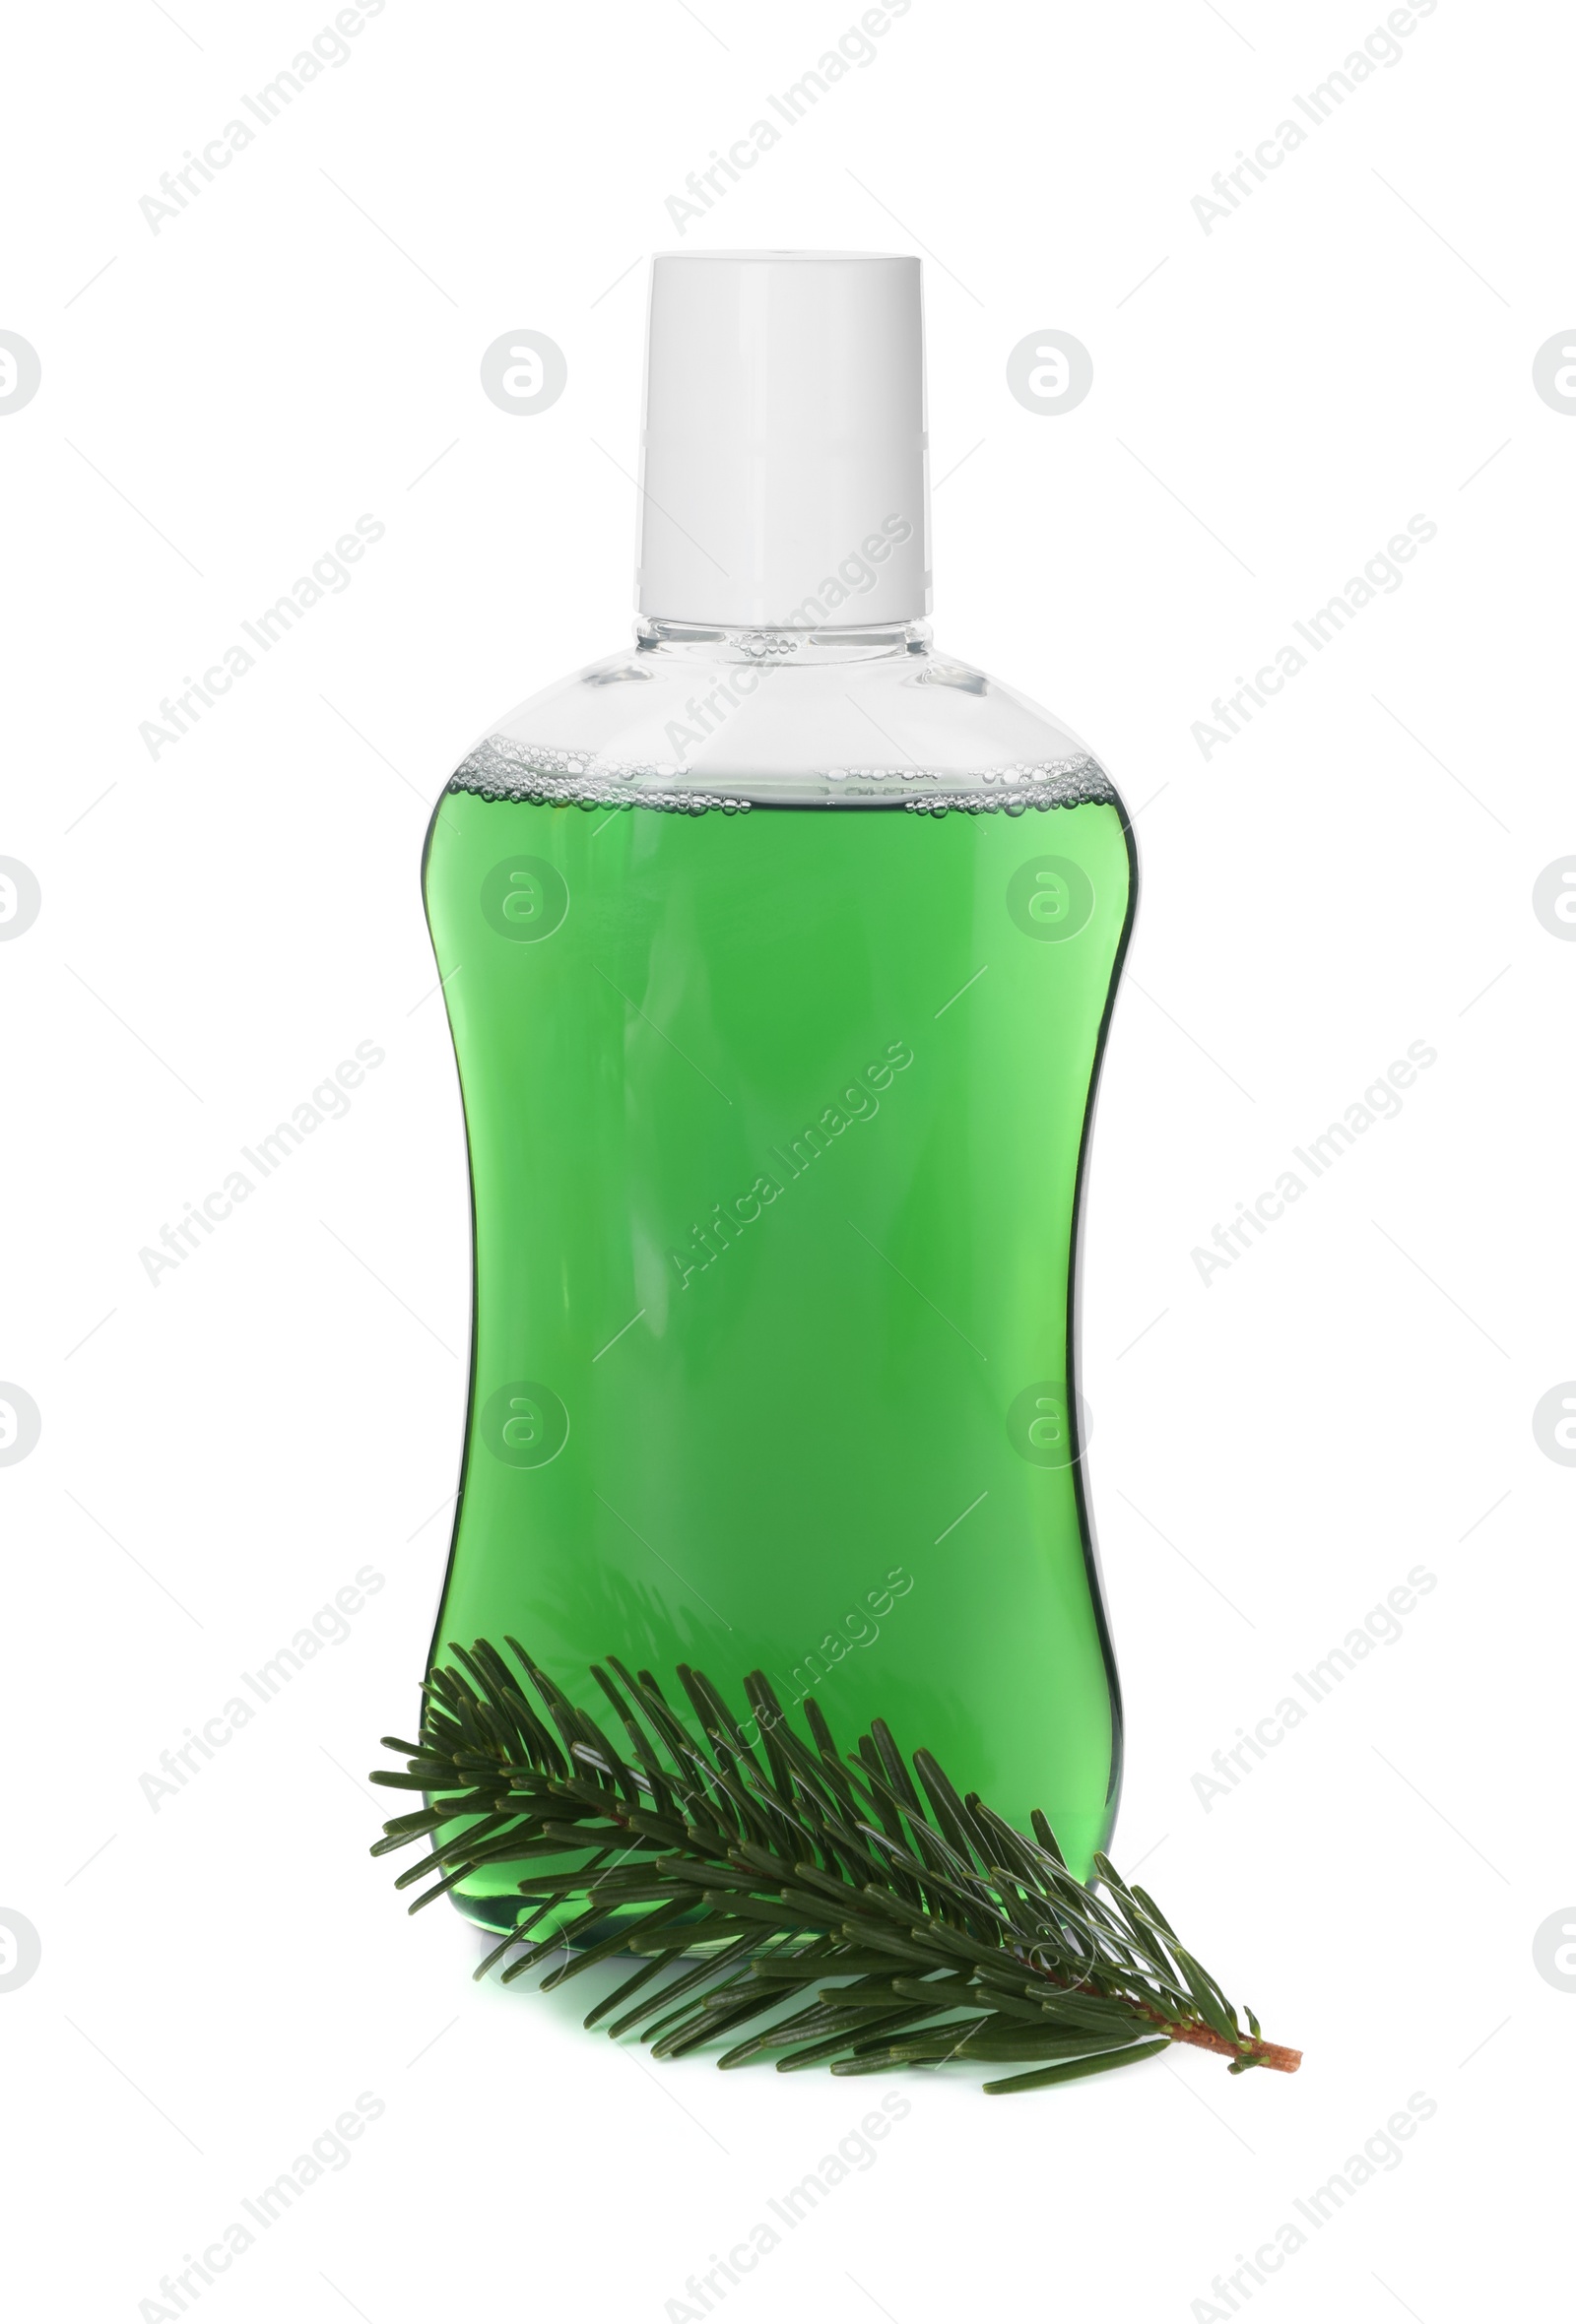 Photo of Bottle of mouthwash and fir twig isolated on white